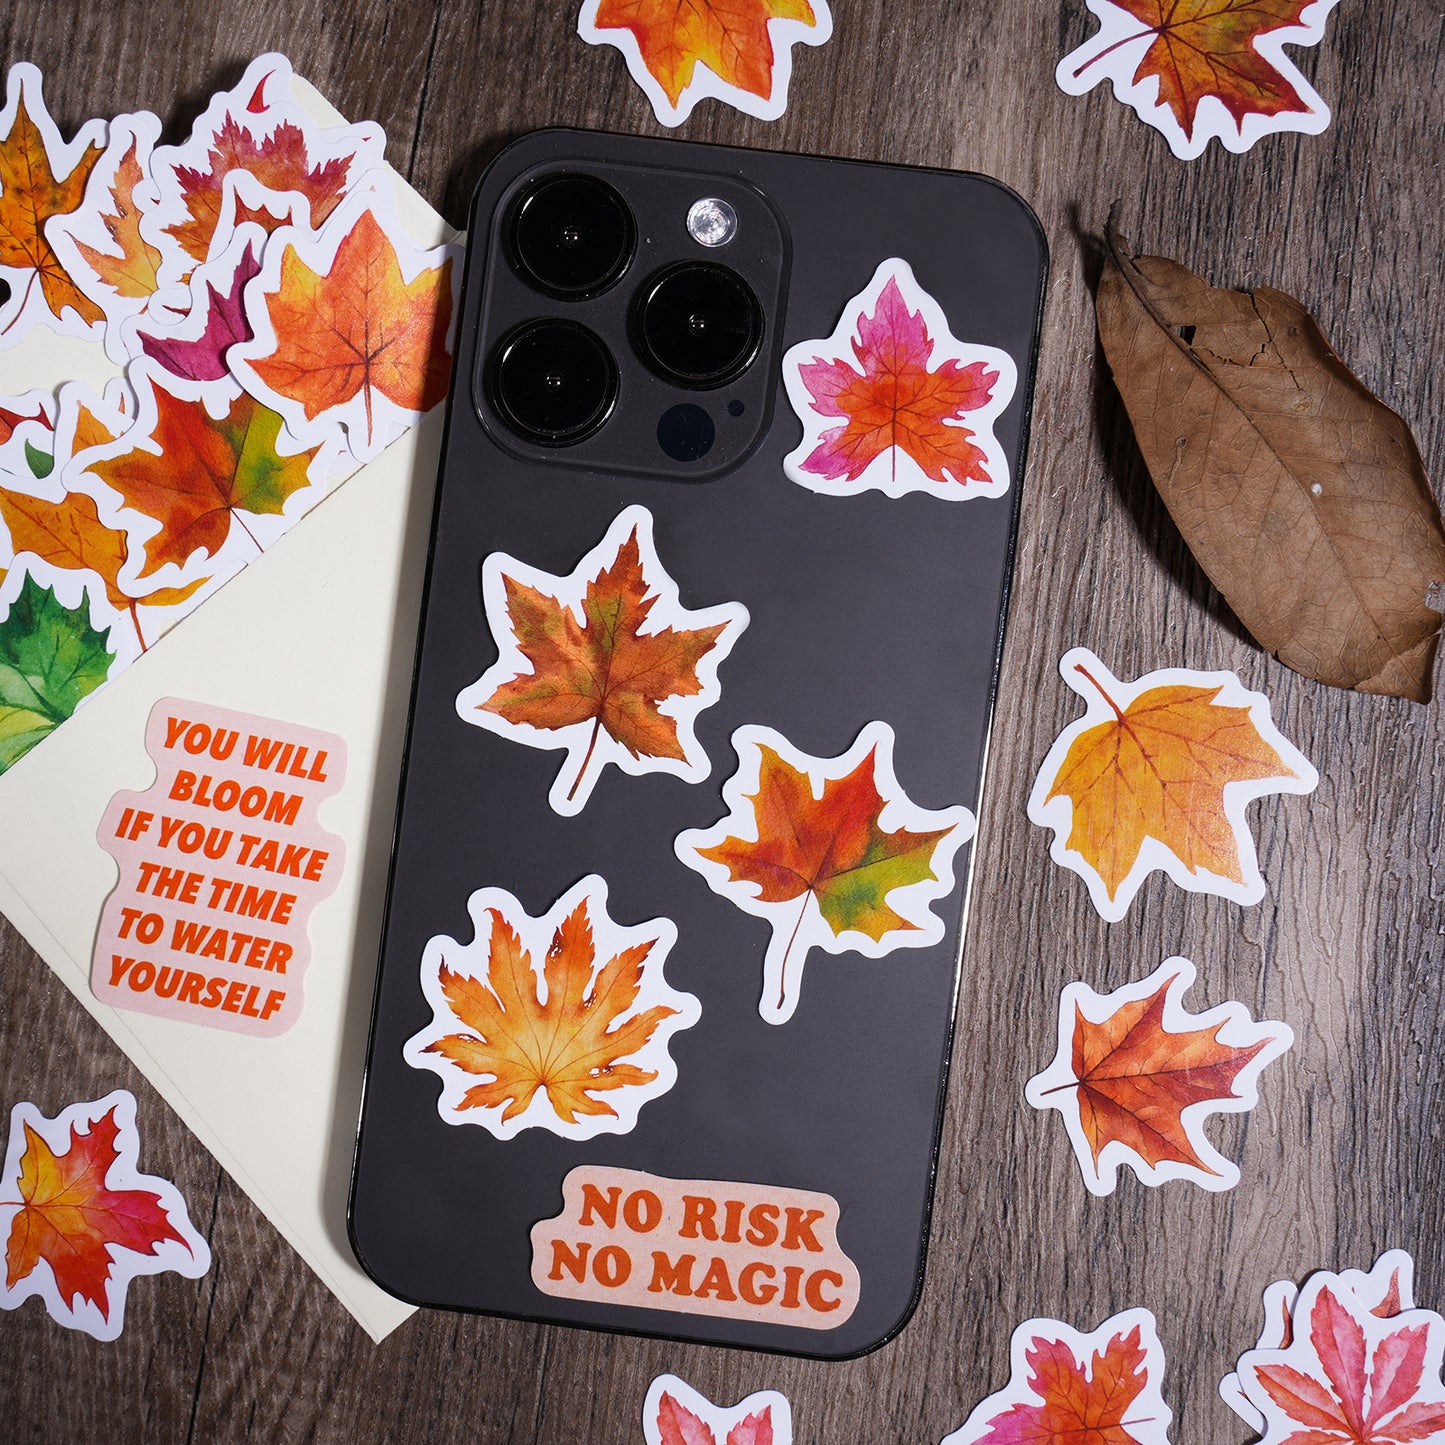 Late Autumn Leaves Stickers 46pcs